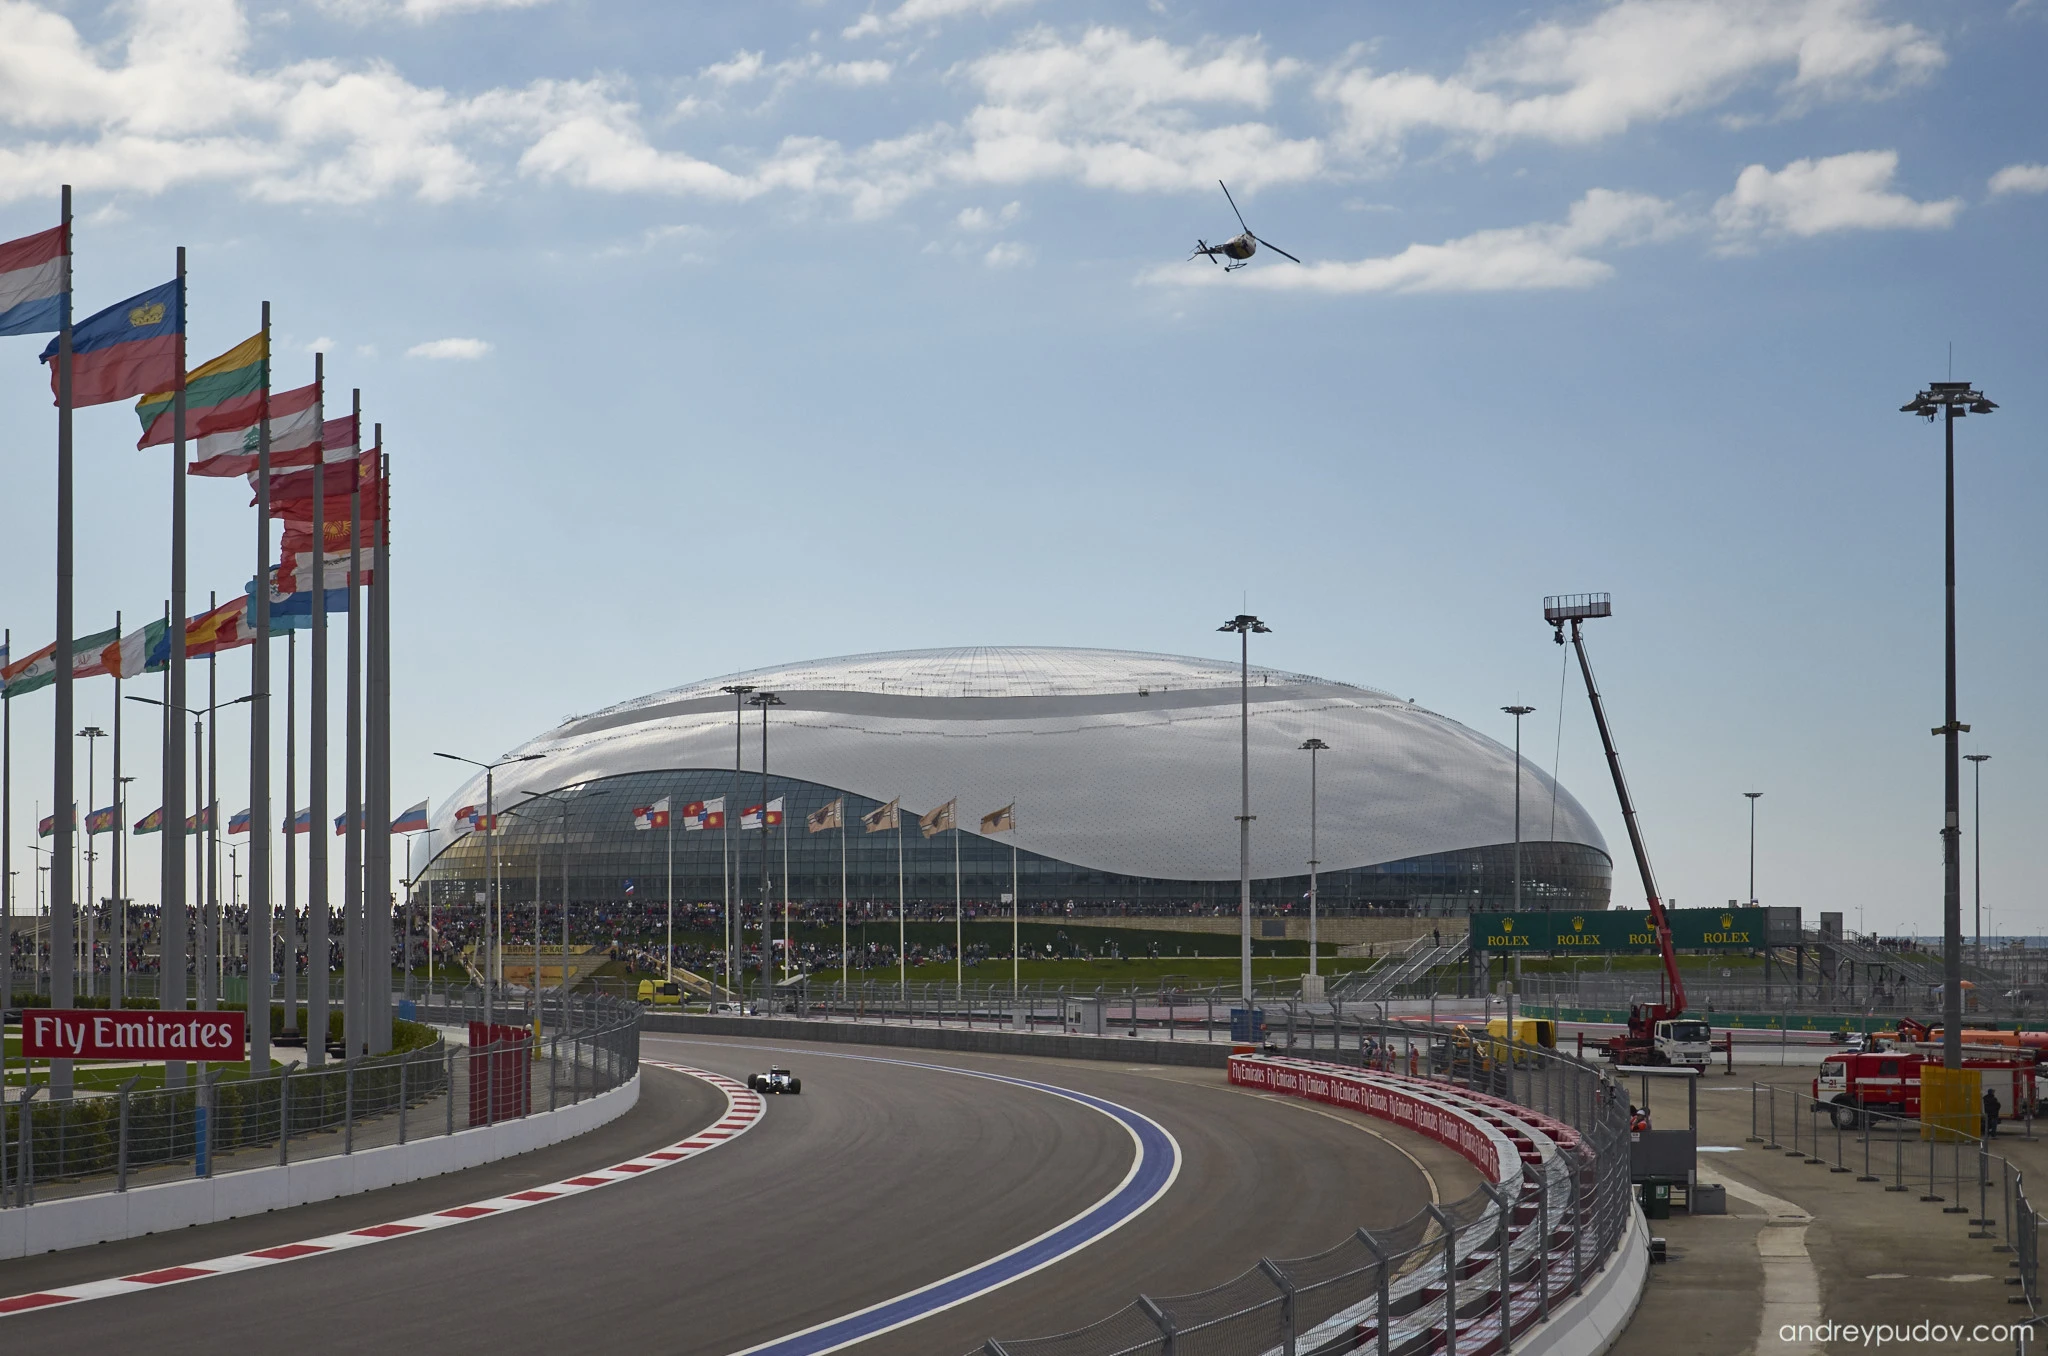 2015 Formula 1 Russian Grand Prix - The Bolshoy Ice Dome is a multi-purpose indoor arena located in Olympic Park, Sochi, Russia. Opened in 2012, the 12,000-seat arena was primarily constructed to host hockey competitions during the 2014 Winter Olympics. Following the Games, it became the home arena of HC Sochi, an expansion team of the KHL. The arena has also hosted concerts and other events. Prior to the Games, the arena hosted the IIHF World U18 Championships and Channel One Cup in 2013.

The arena's exterior is distinguished by its LED-illuminated roof, which its designers described as resembling fabergé eggs and frozen water droplets.